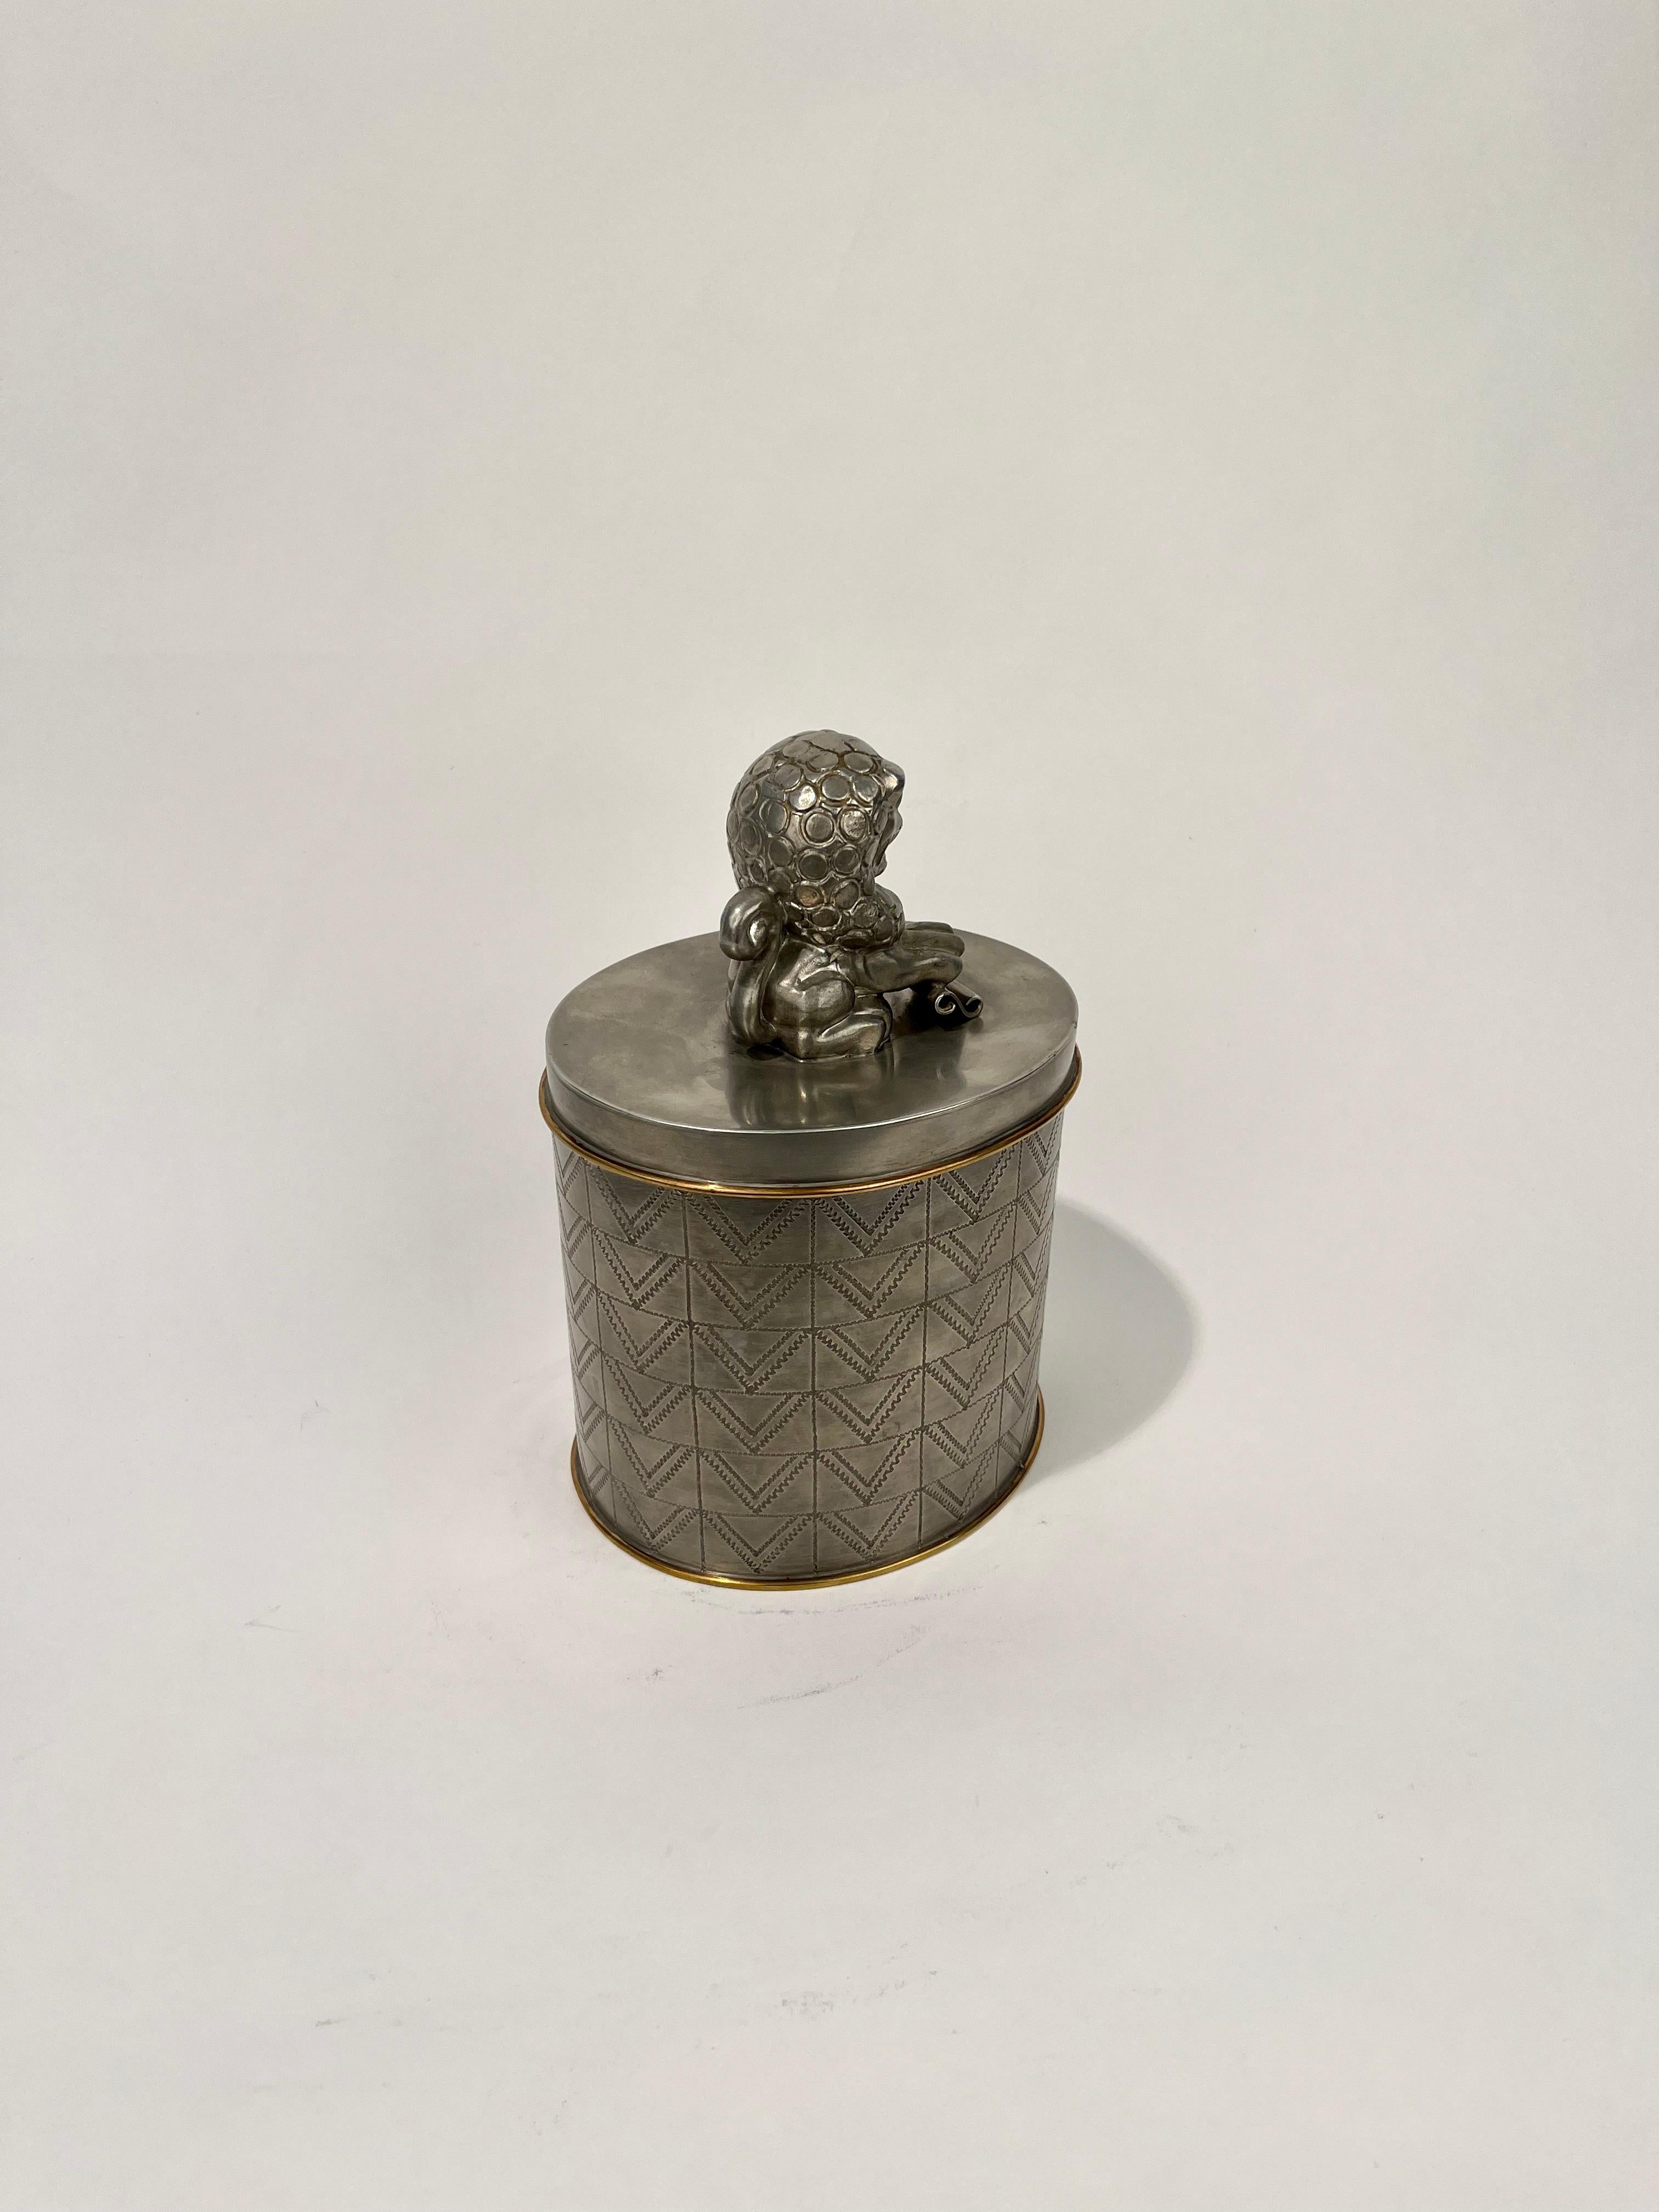 Anna Petrus designed cigarr box for Firma Svenskt Tenn 1928. Model 462. 

Anna Petrus was a sculptor and designer at the beginning of the 20th Century. After her death, Anna Petrus' work was almost forgotten, but in recent years, it been